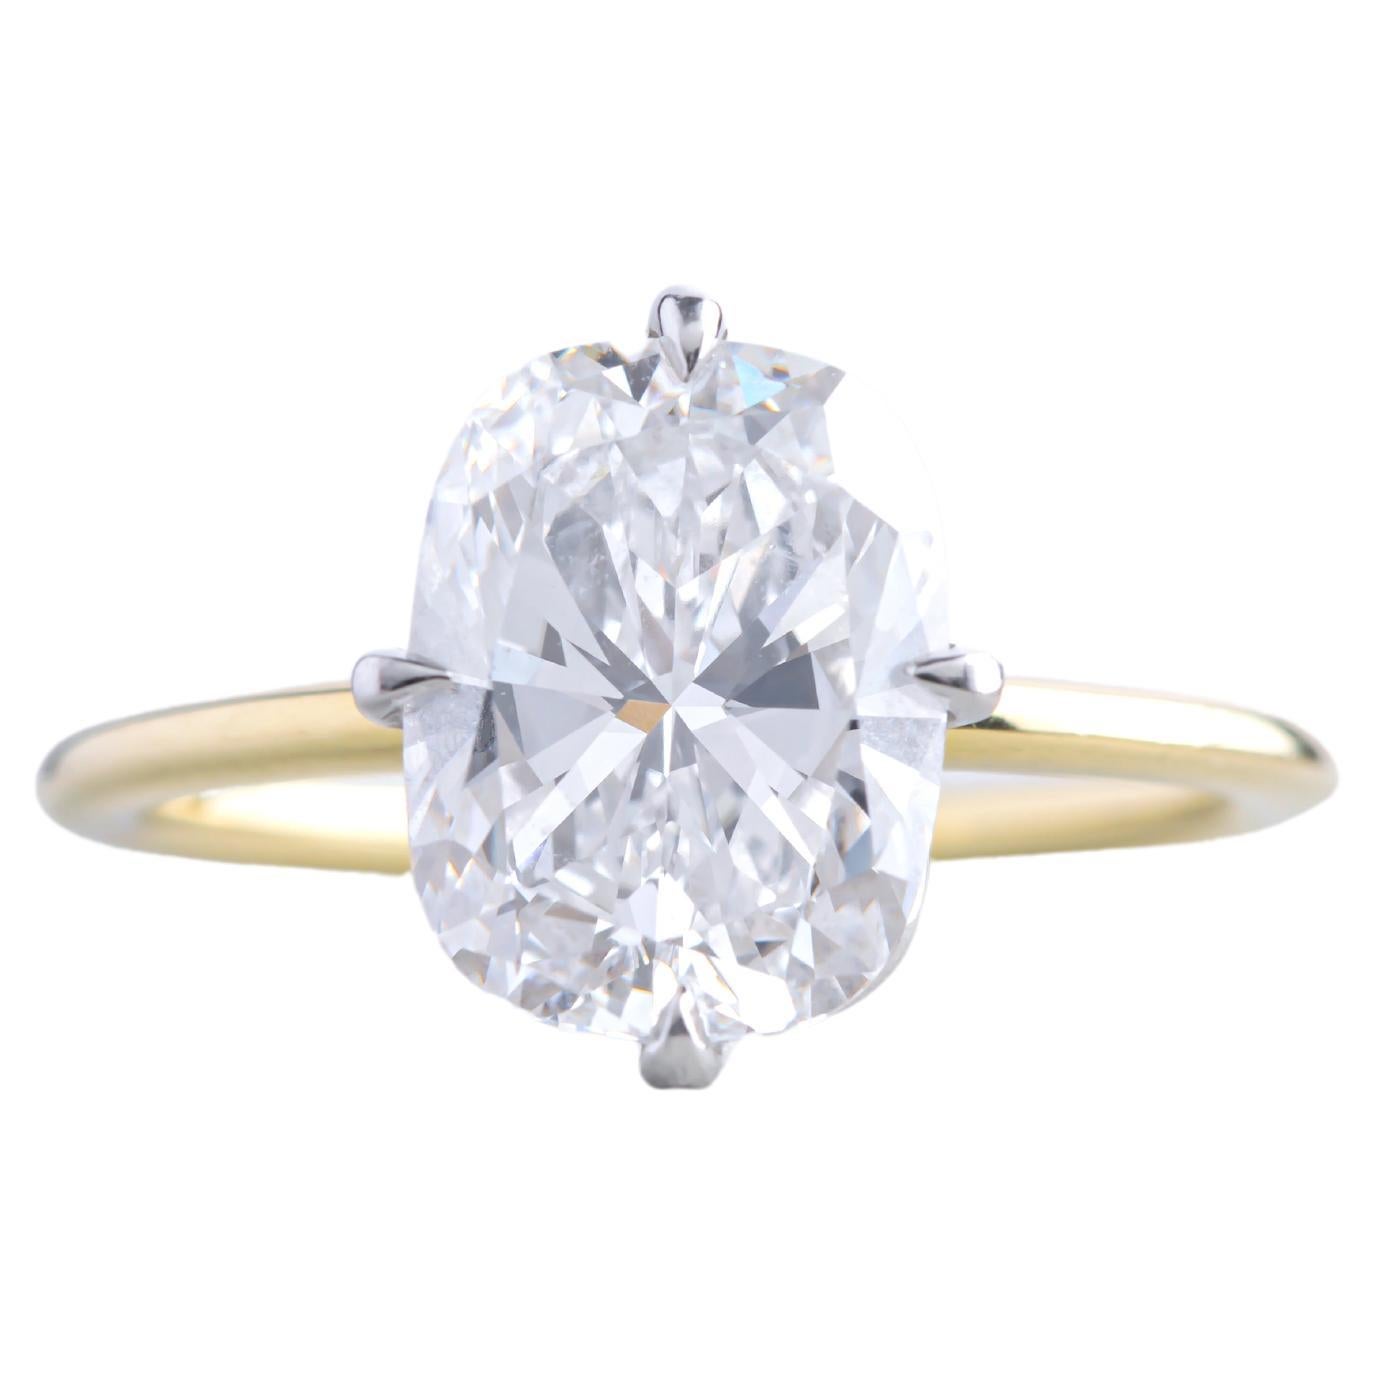 4 Carat Elongated Cushion Cut Diamond Engagement Ring For Sale At